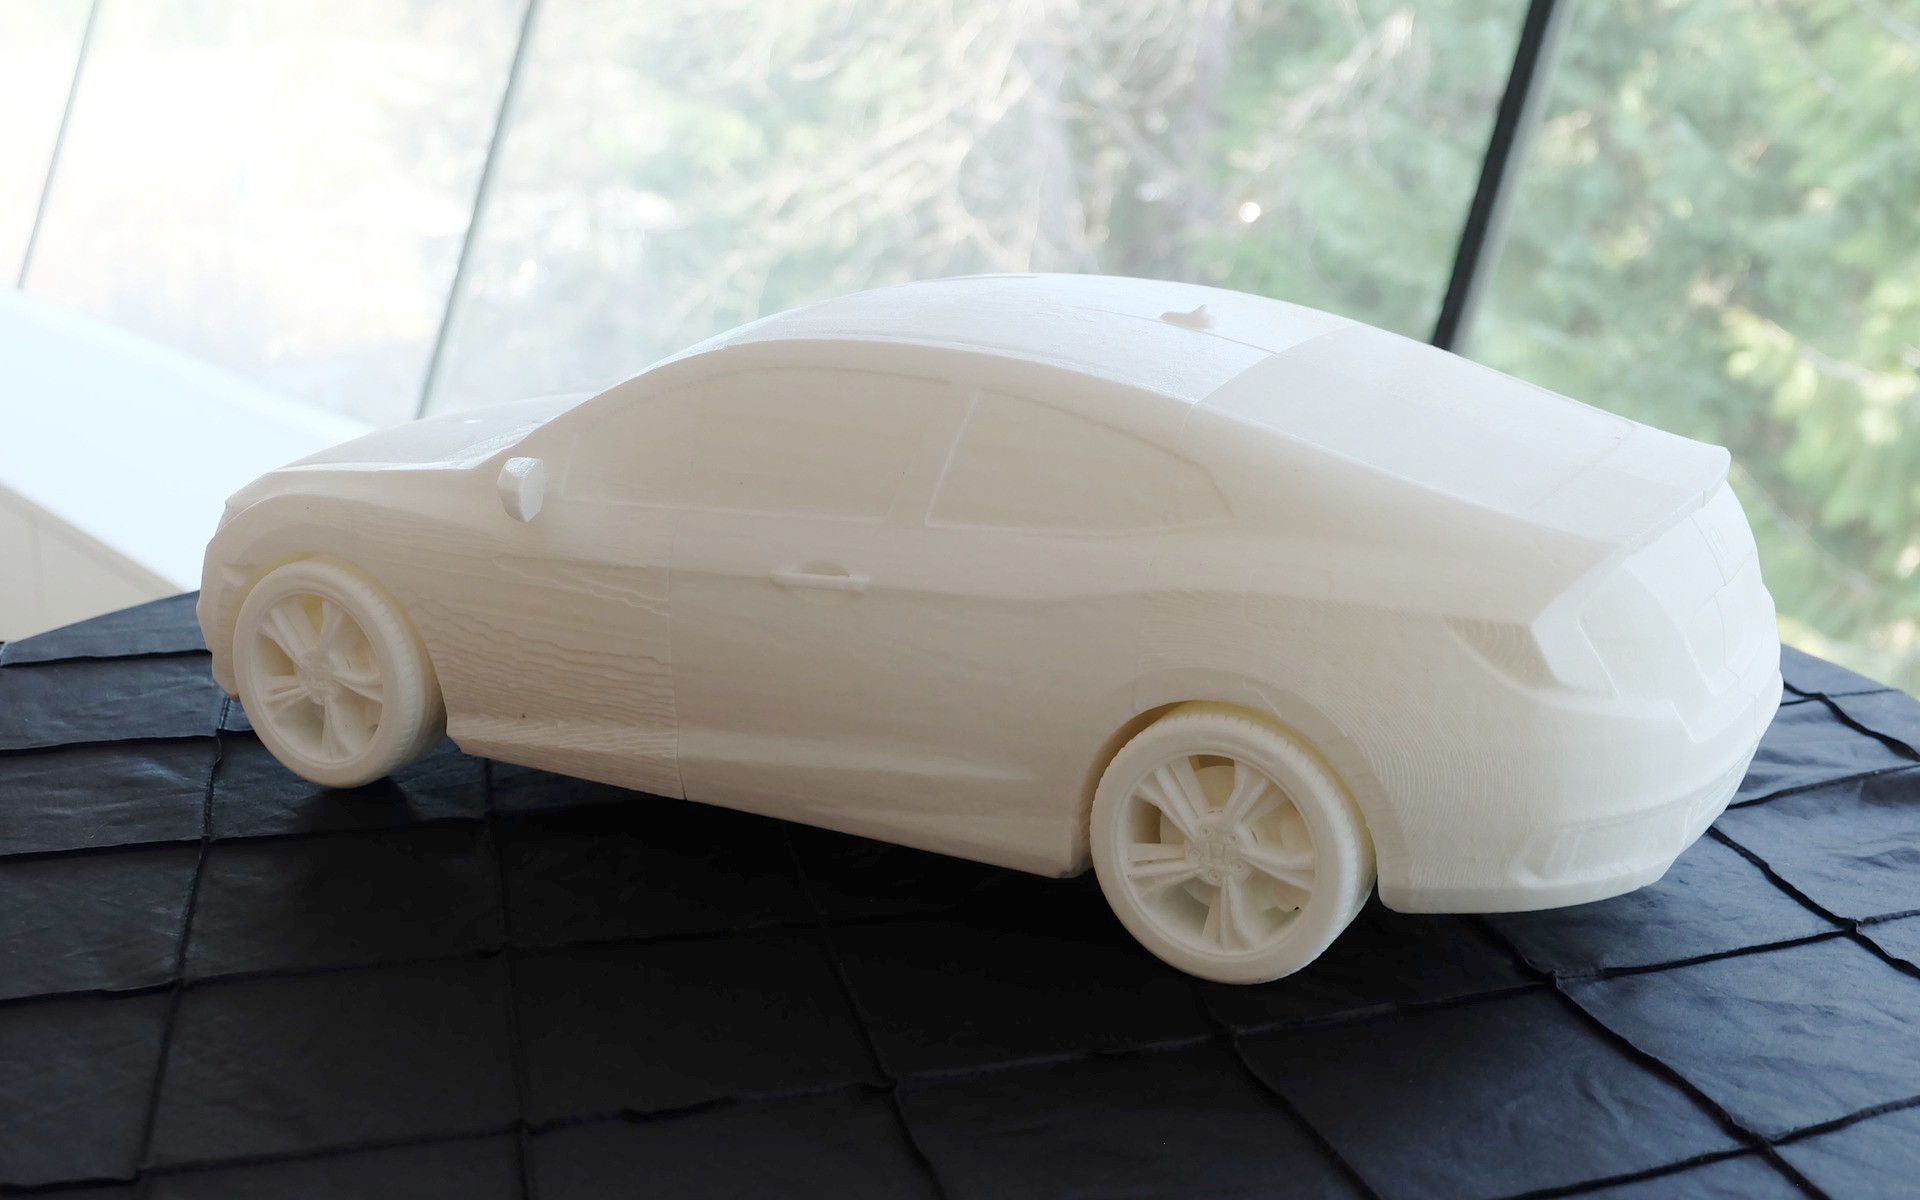 A 3D-printed scale model of the 2016 Honda Civic Coupe.